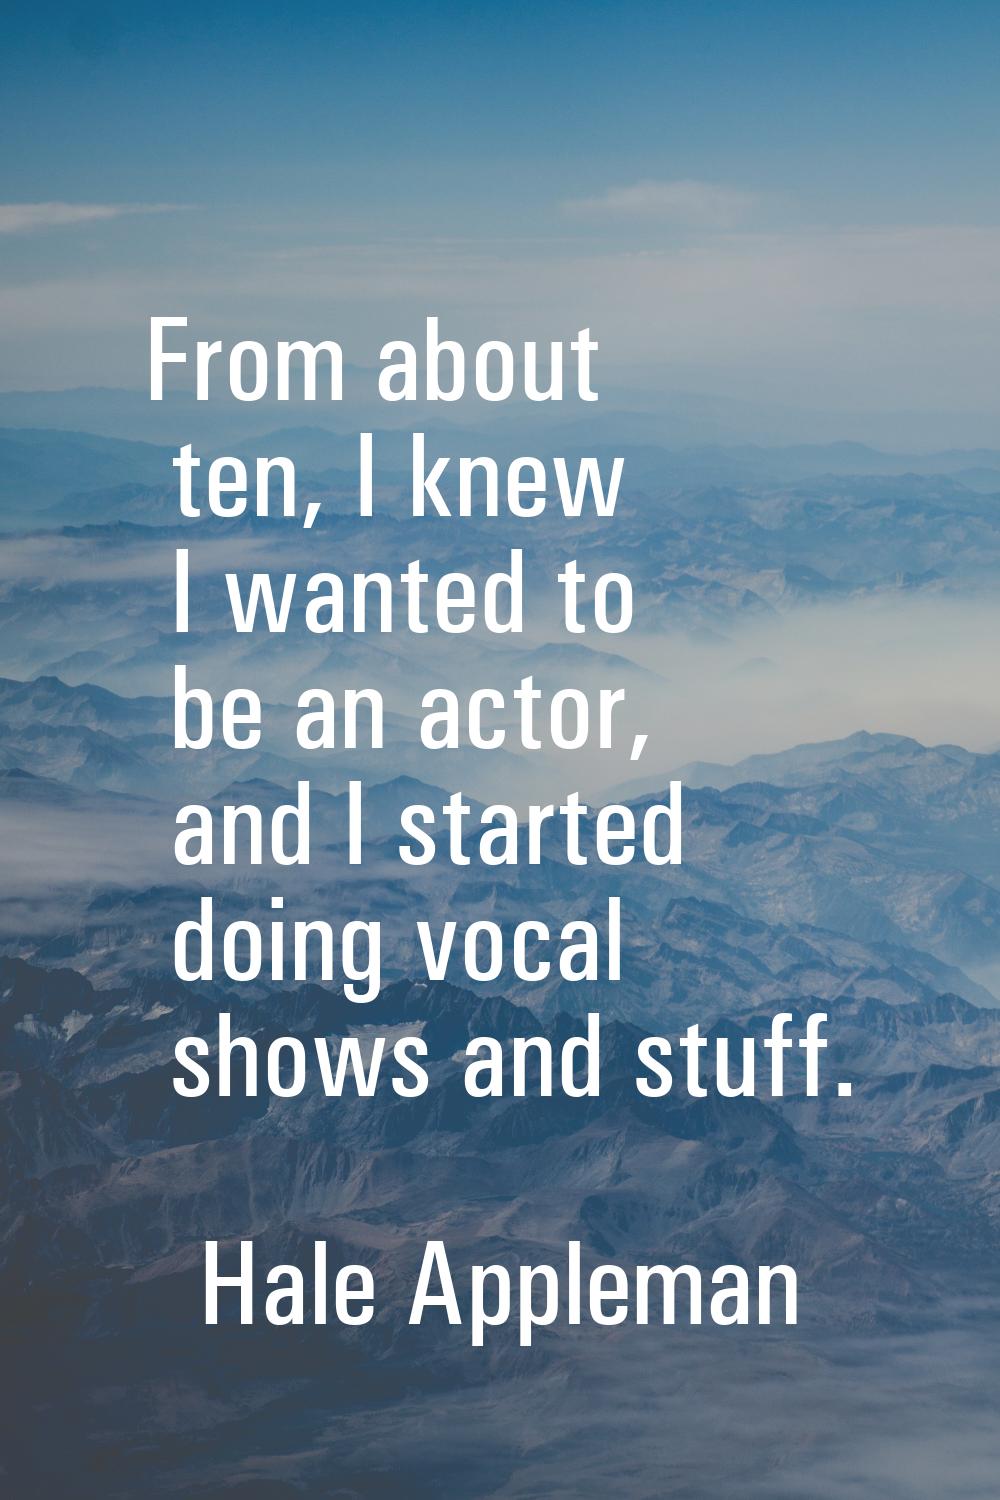 From about ten, I knew I wanted to be an actor, and I started doing vocal shows and stuff.